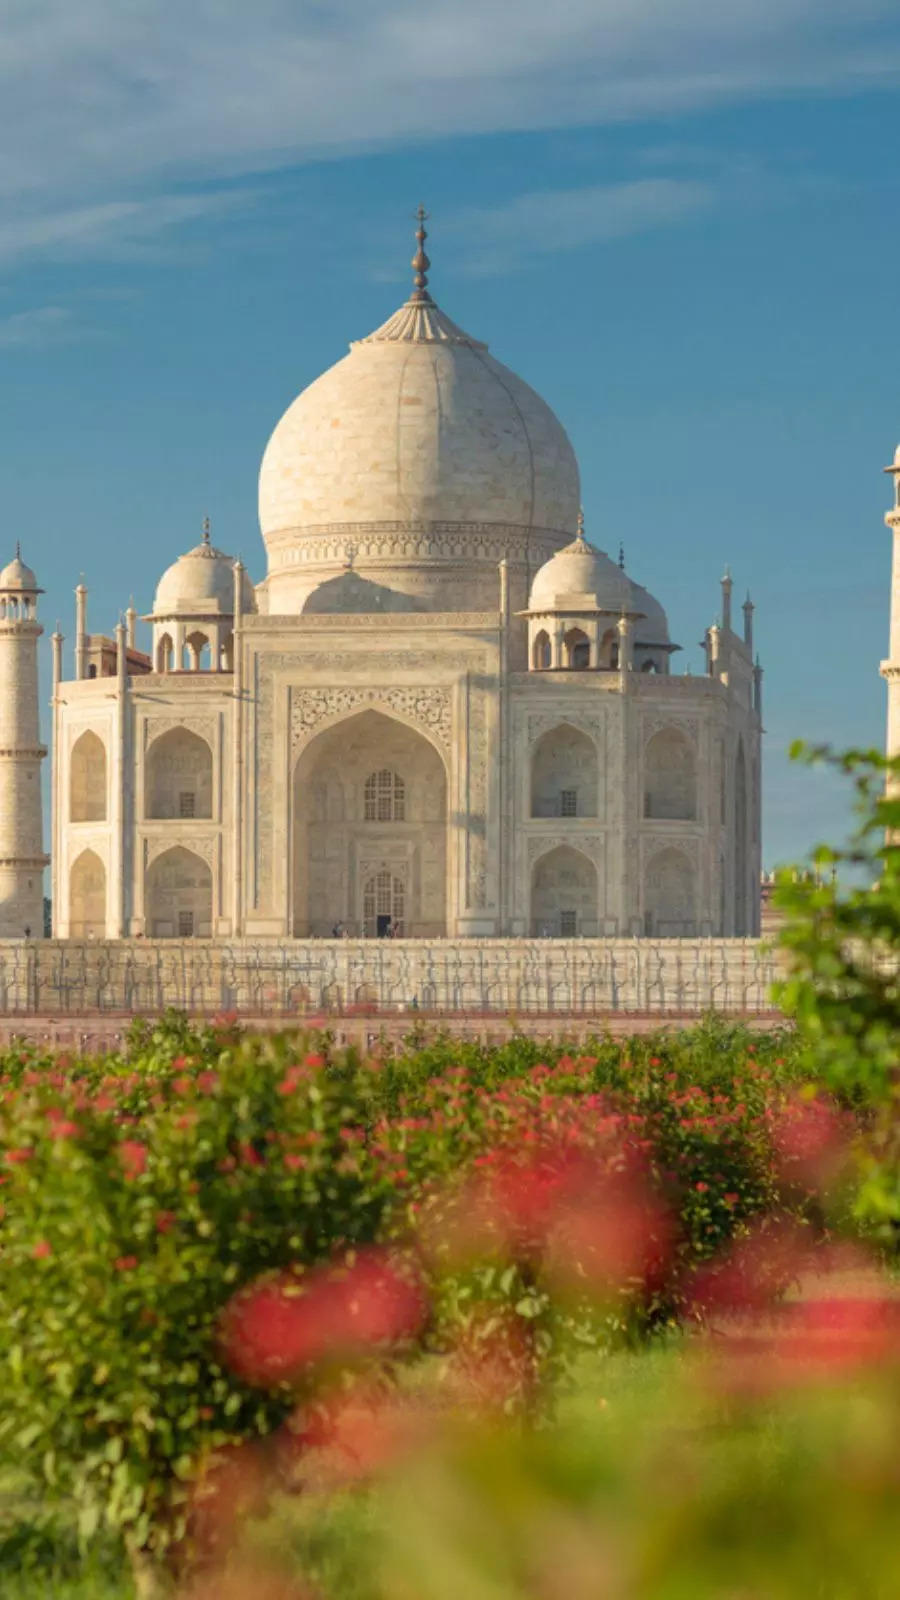 8 architectural marvels built by Mughal Emperor Shah Jahan, other than Taj Mahal 